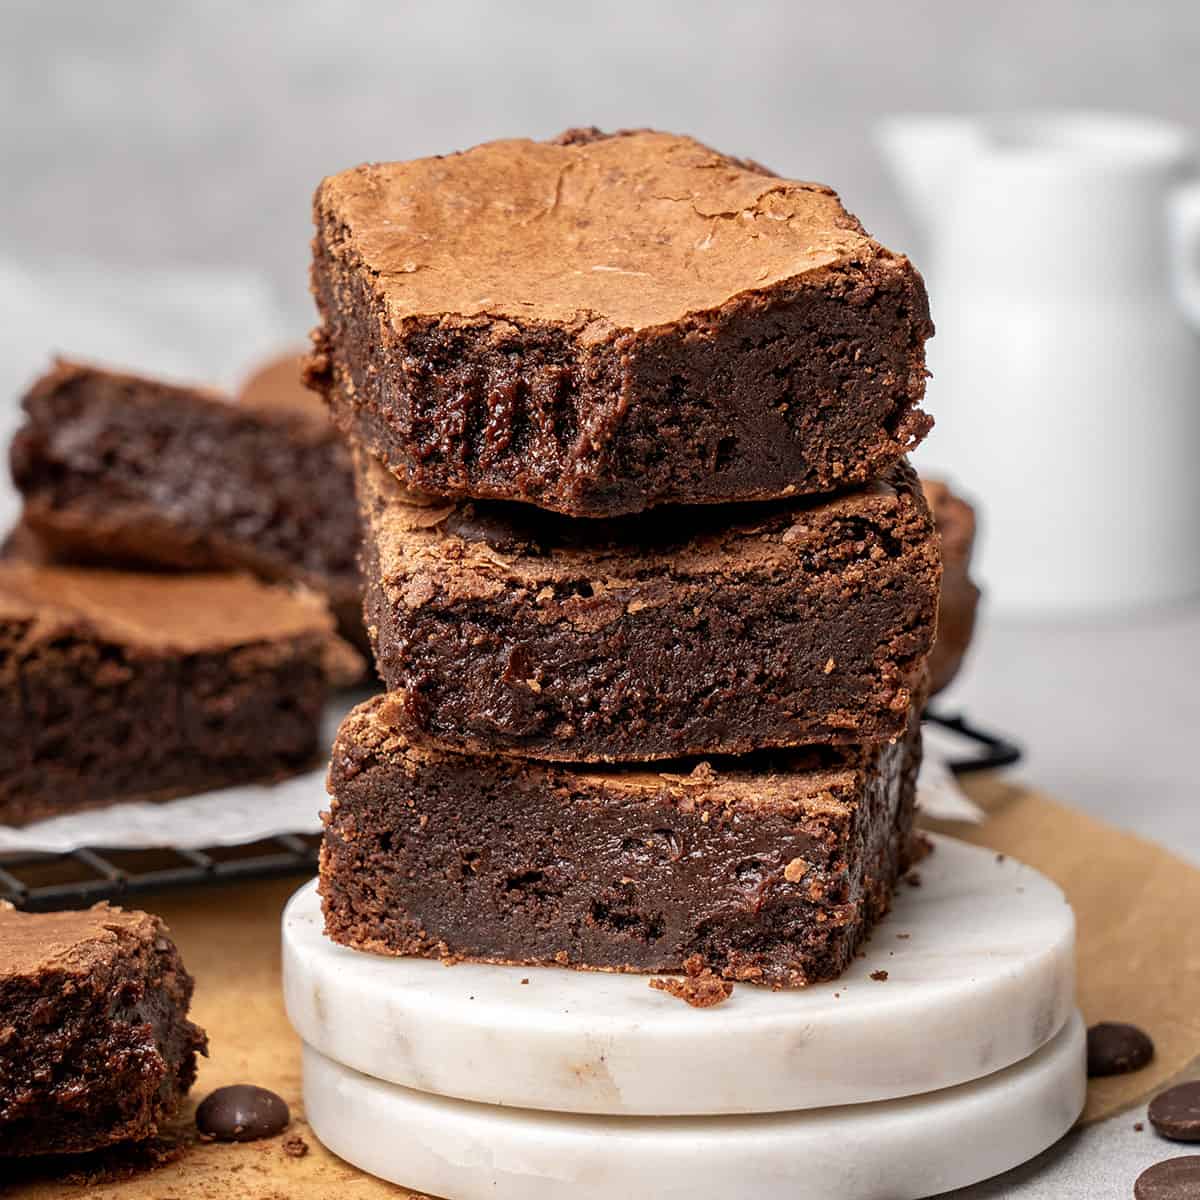 <p>When stored at room temperature, brownies last for <strong>3-4 days</strong>, if properly stored. This is a standard time frame but the exact time could change based on how they are stored, the humidity, and the room's actual temperature. Standard room temperature is generally considered 68- 77 degrees Fahrenheit.</p> <p><strong>Go to the recipe: <a href="https://www.spatuladesserts.com/dairy-free-brownies/">Dairy Free Brownies</a></strong></p>